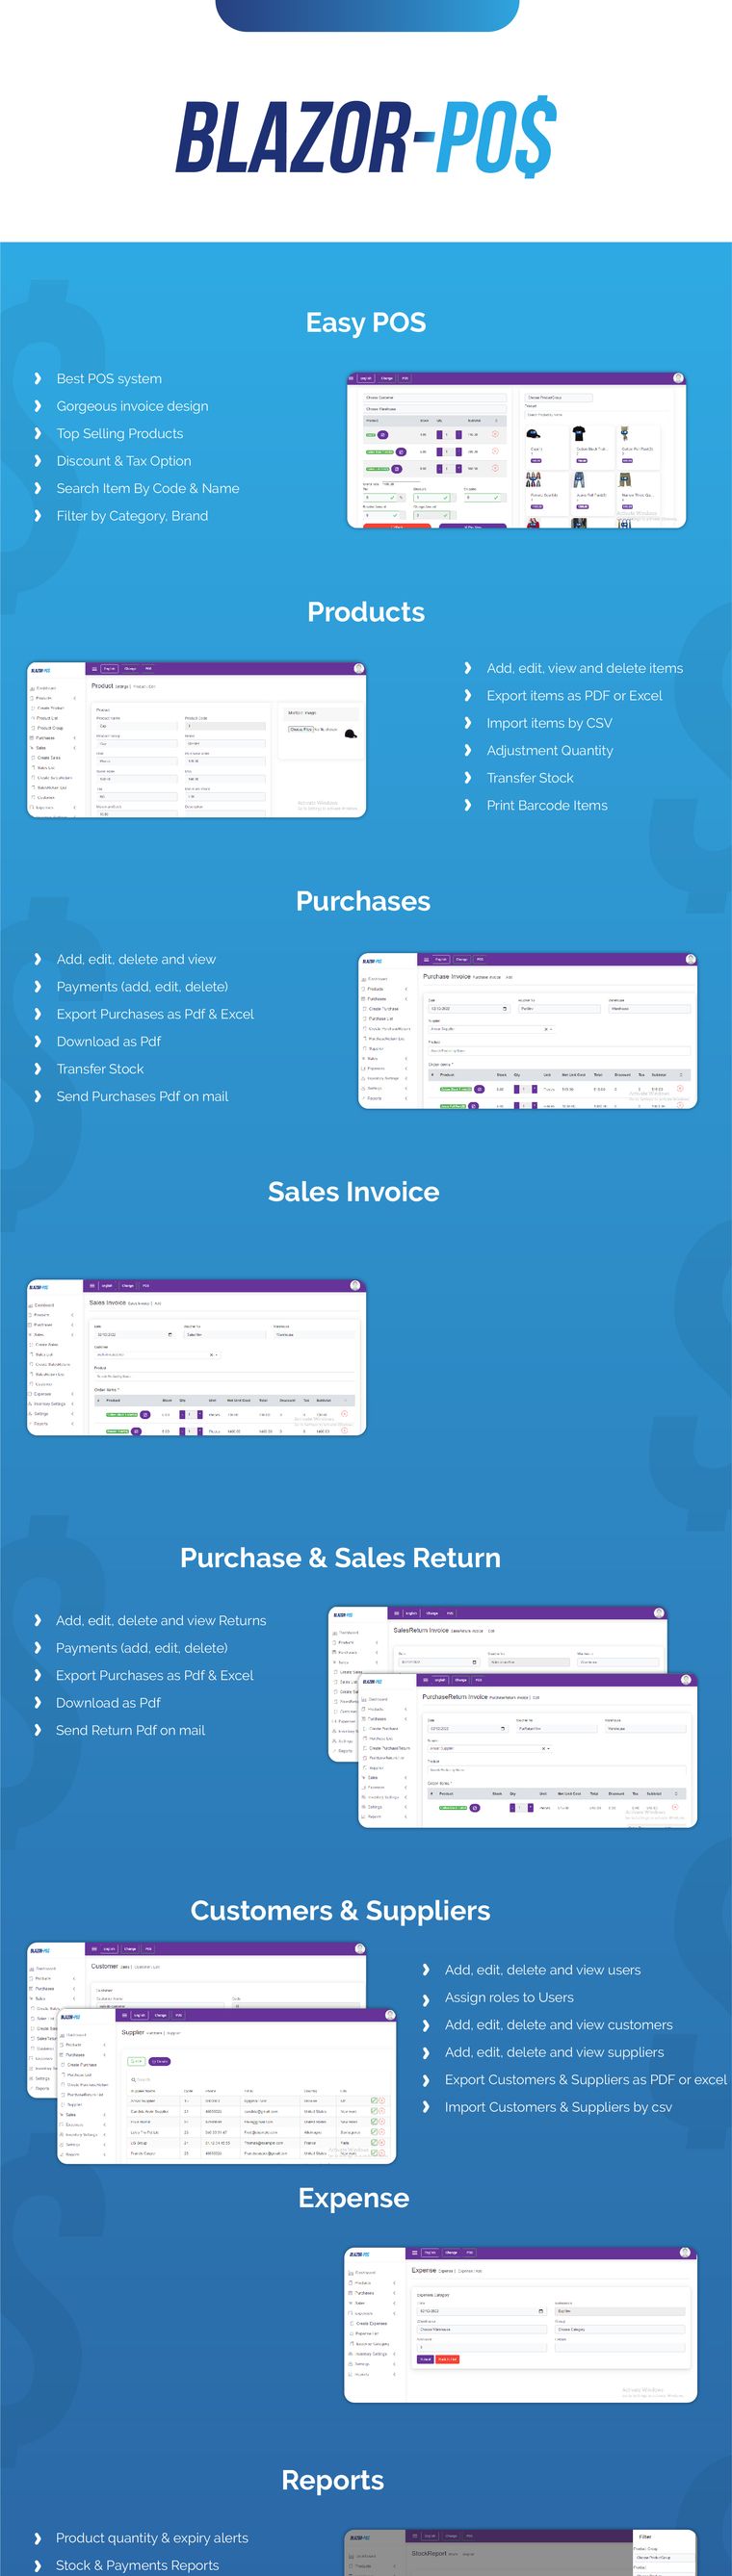 Blazor Pos - Advance Inventory and Sales Management System - 1